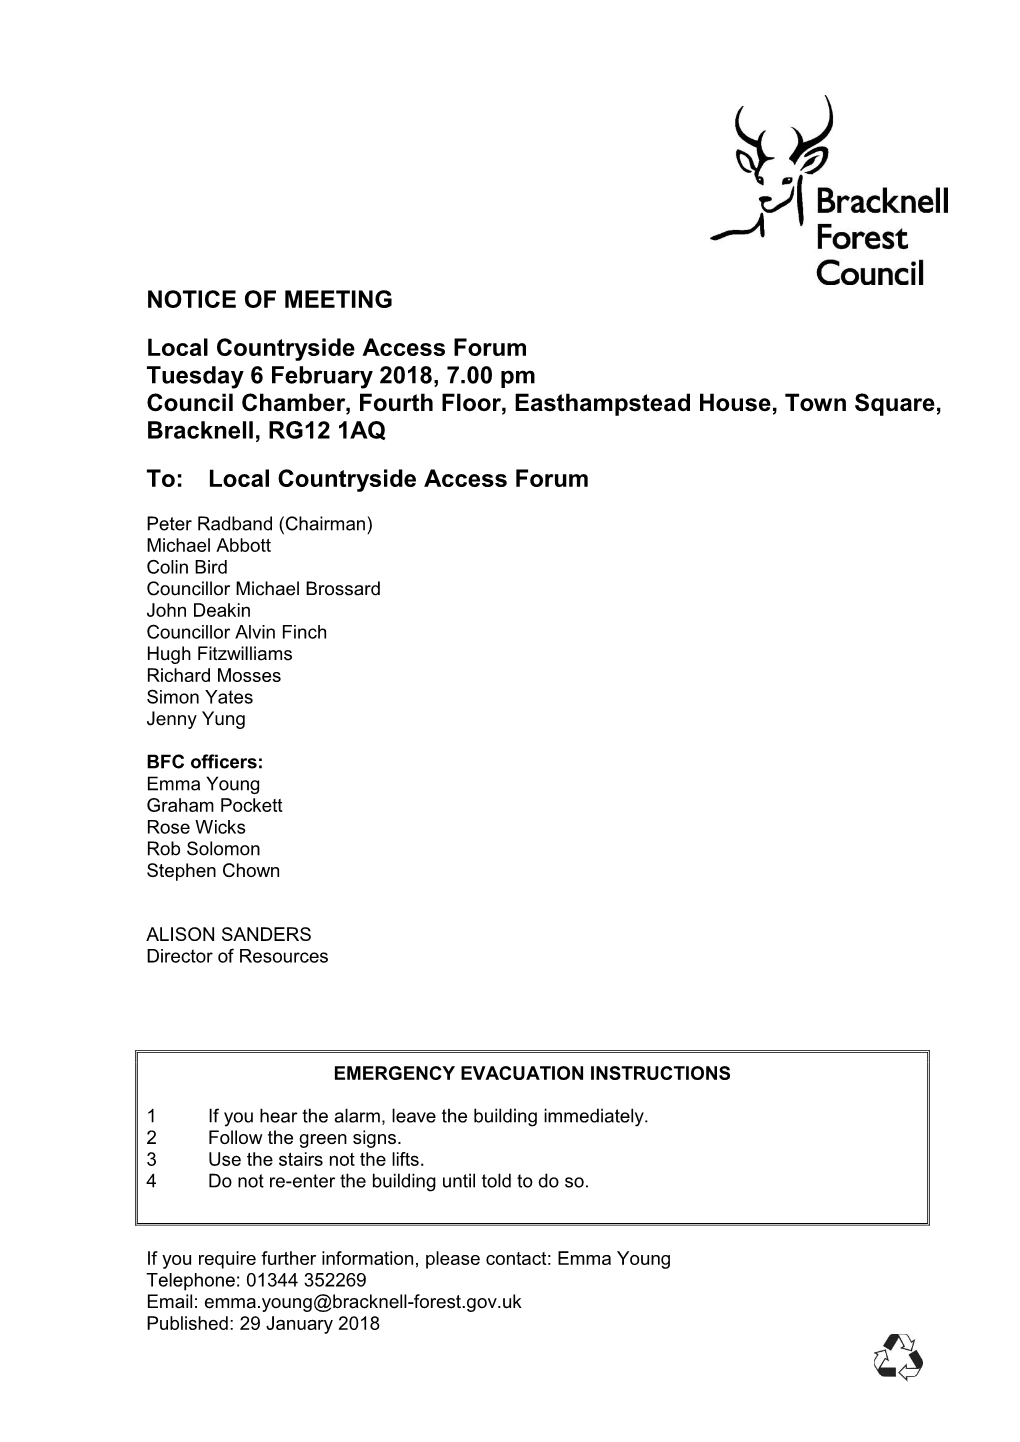 (Public Pack)Agenda Document for Local Countryside Access Forum